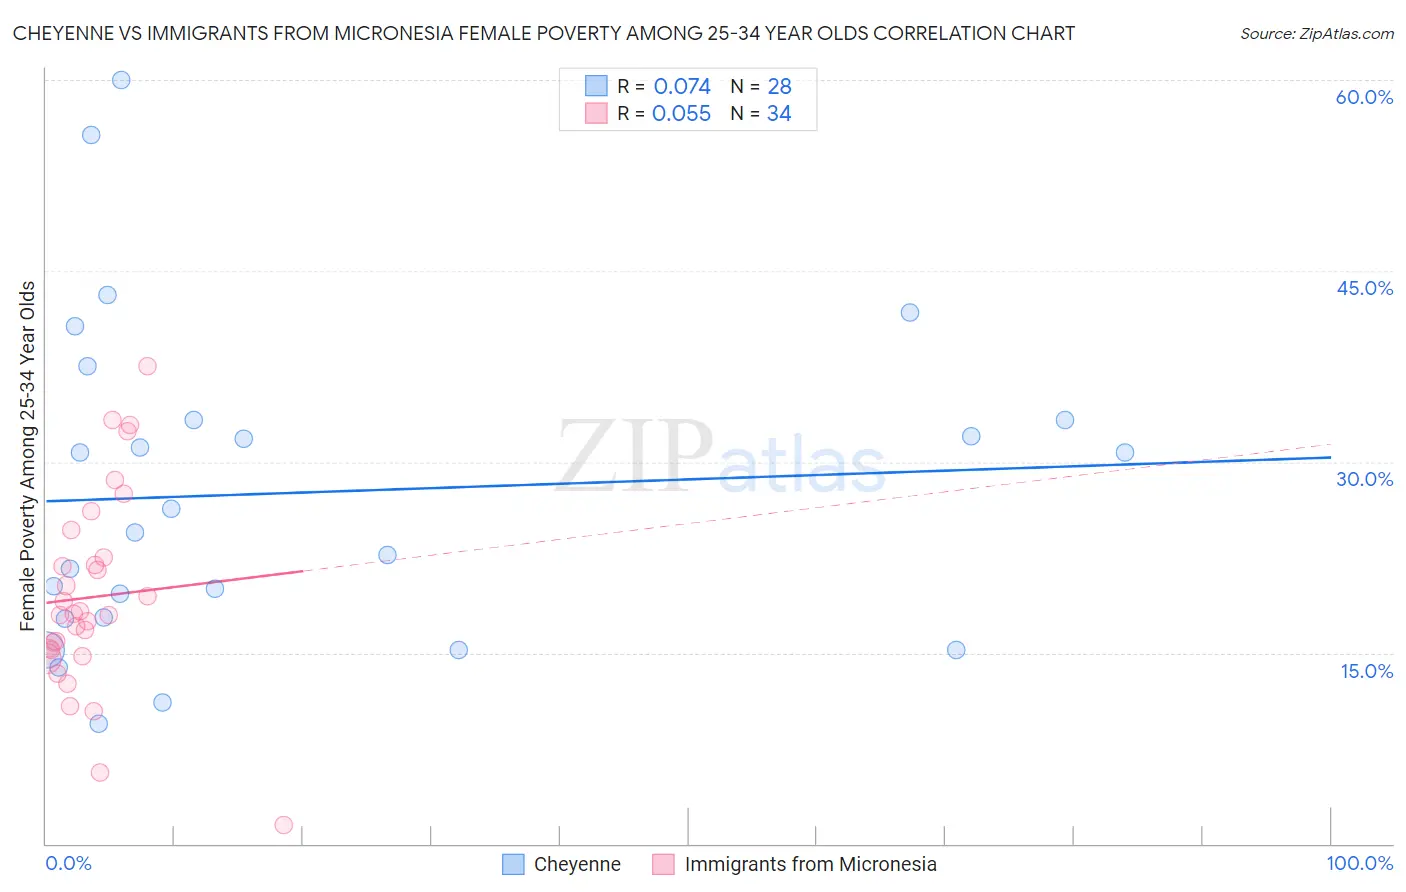 Cheyenne vs Immigrants from Micronesia Female Poverty Among 25-34 Year Olds